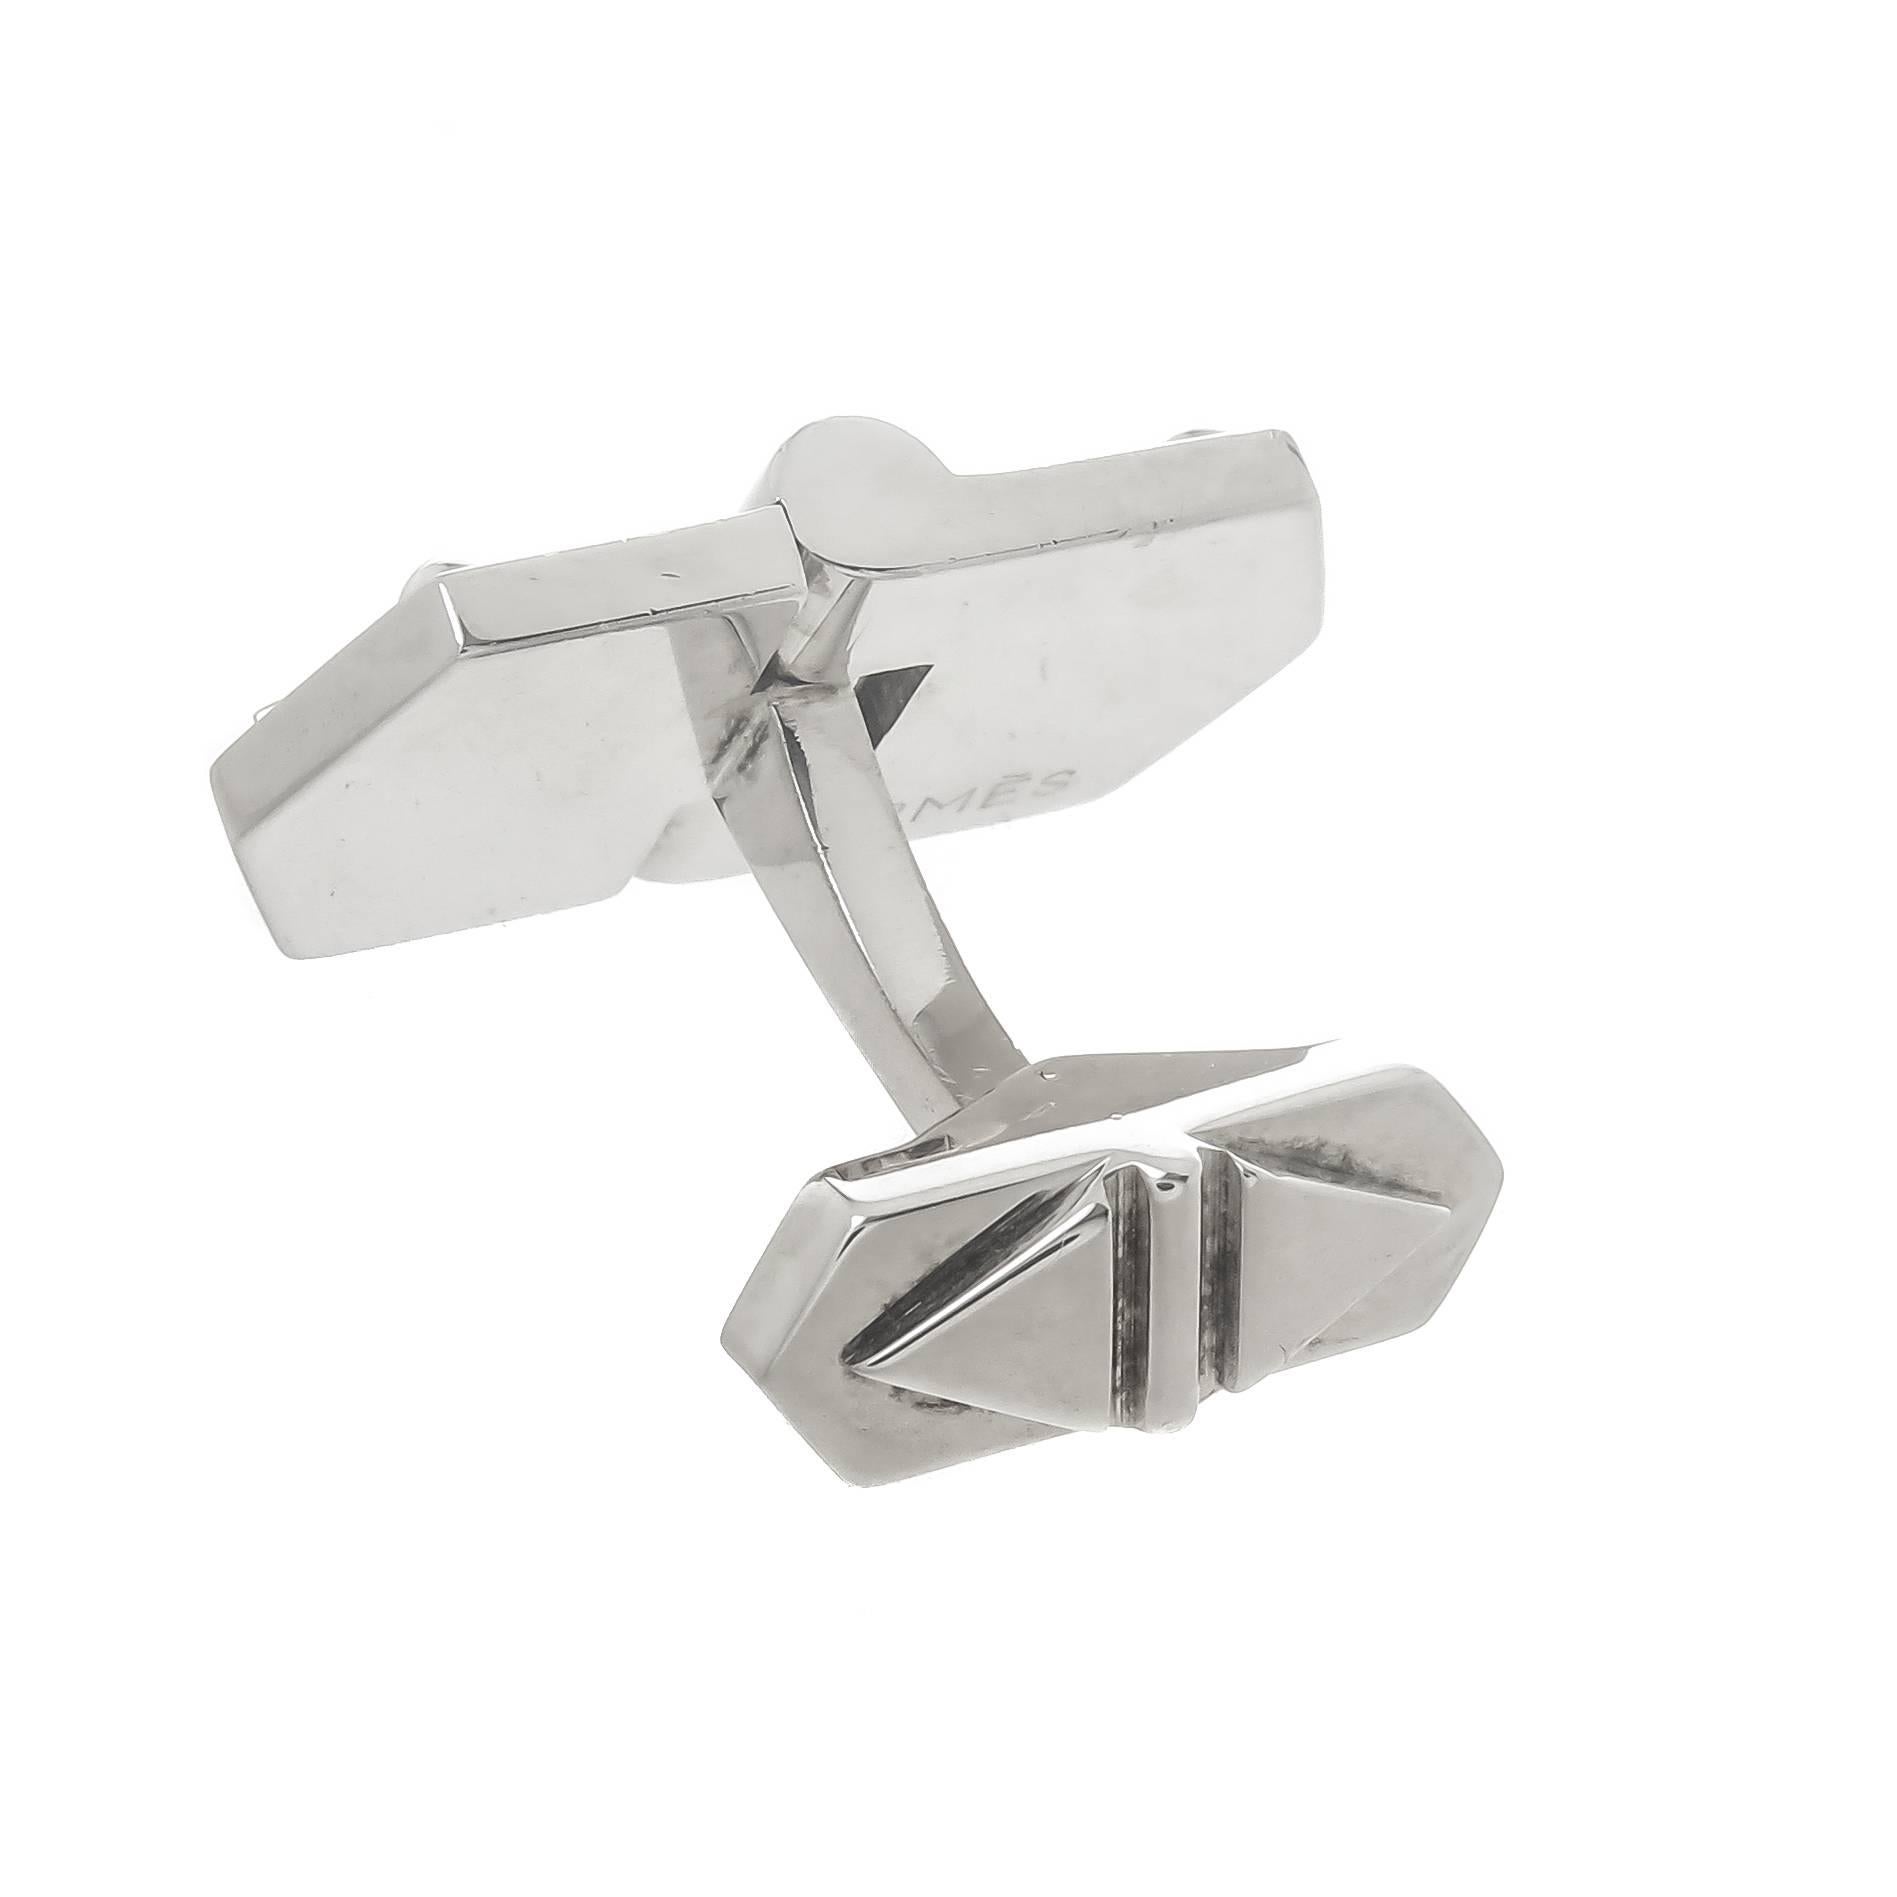 Circa 2000 Very Cool Hermes Sterling Silver Door Hinge form Cufflinks, the top measures  1 inch X  1/2 inch and has a raised detailed Door Hinge and bolts. Excellent, unworn condition and come in a Hermes Suede travel Pouch. 